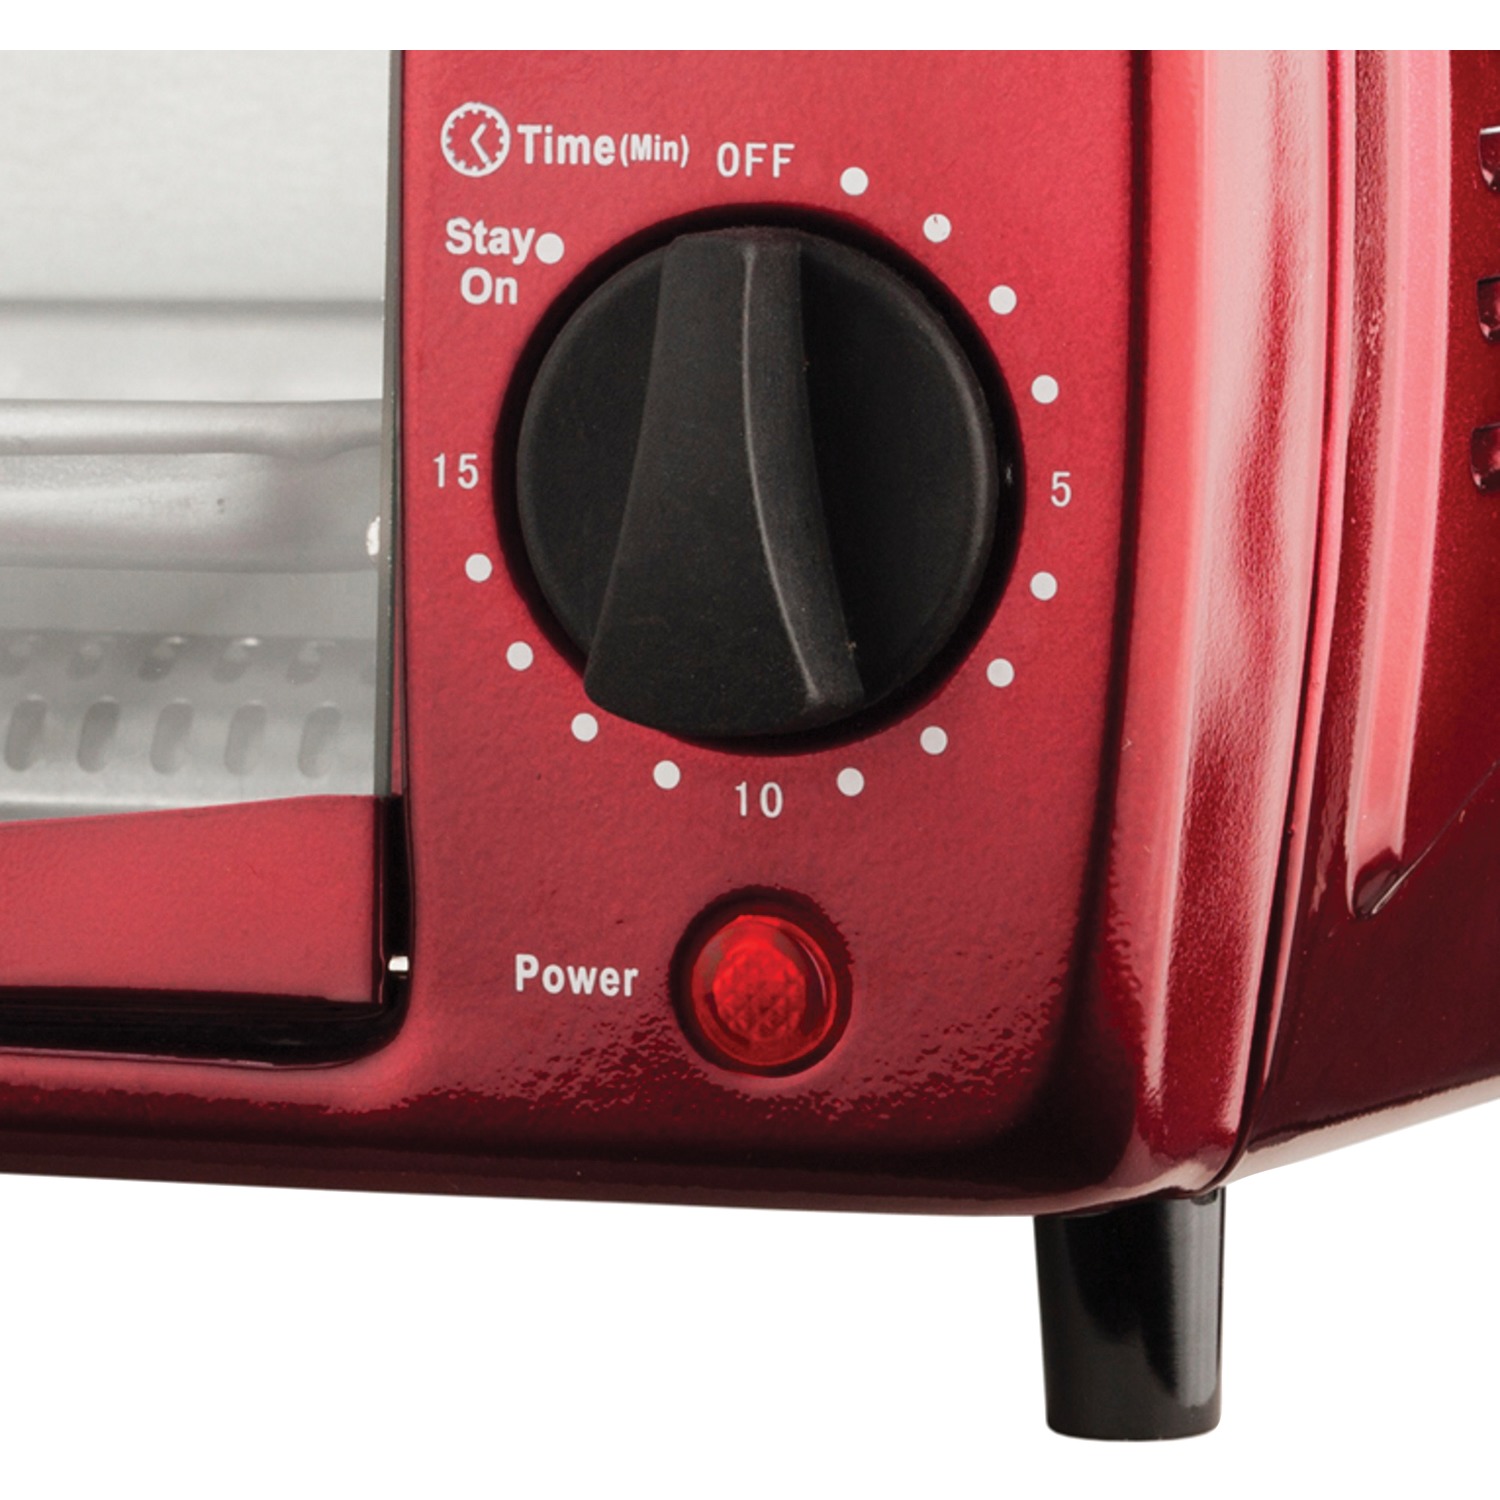 Brentwood Appliances TS-345R Stainless Steel 4 Slice Toaster Oven, Ruby Red - image 3 of 5